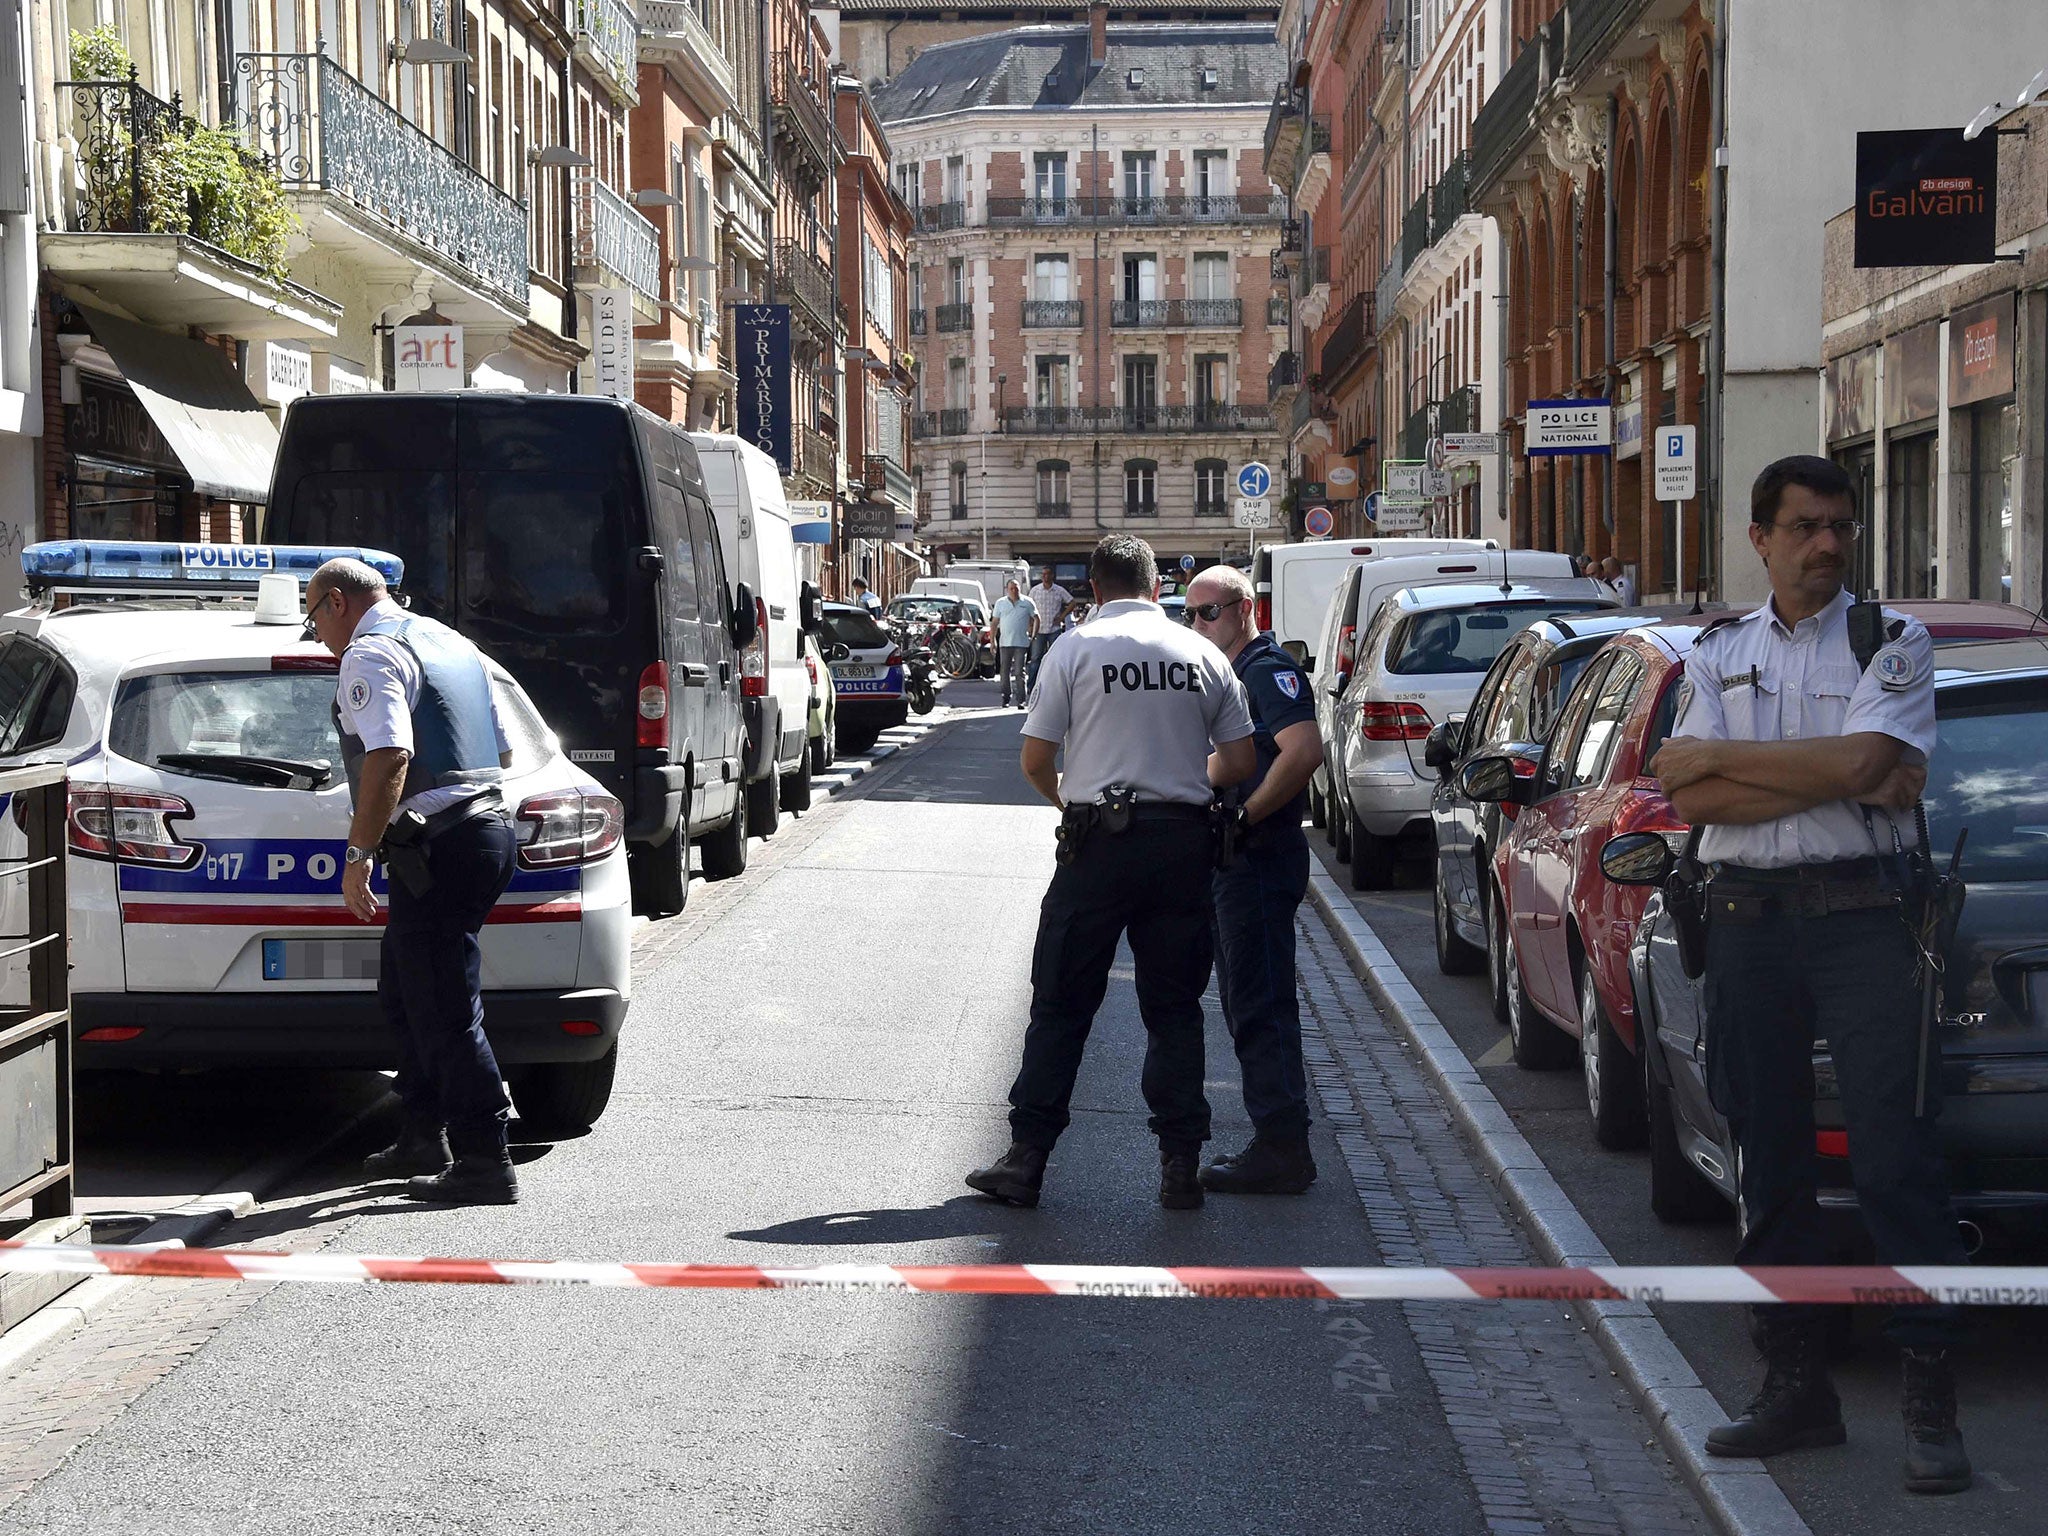 The attack was the latest in a series of stabbings in France (AFP/Getty)